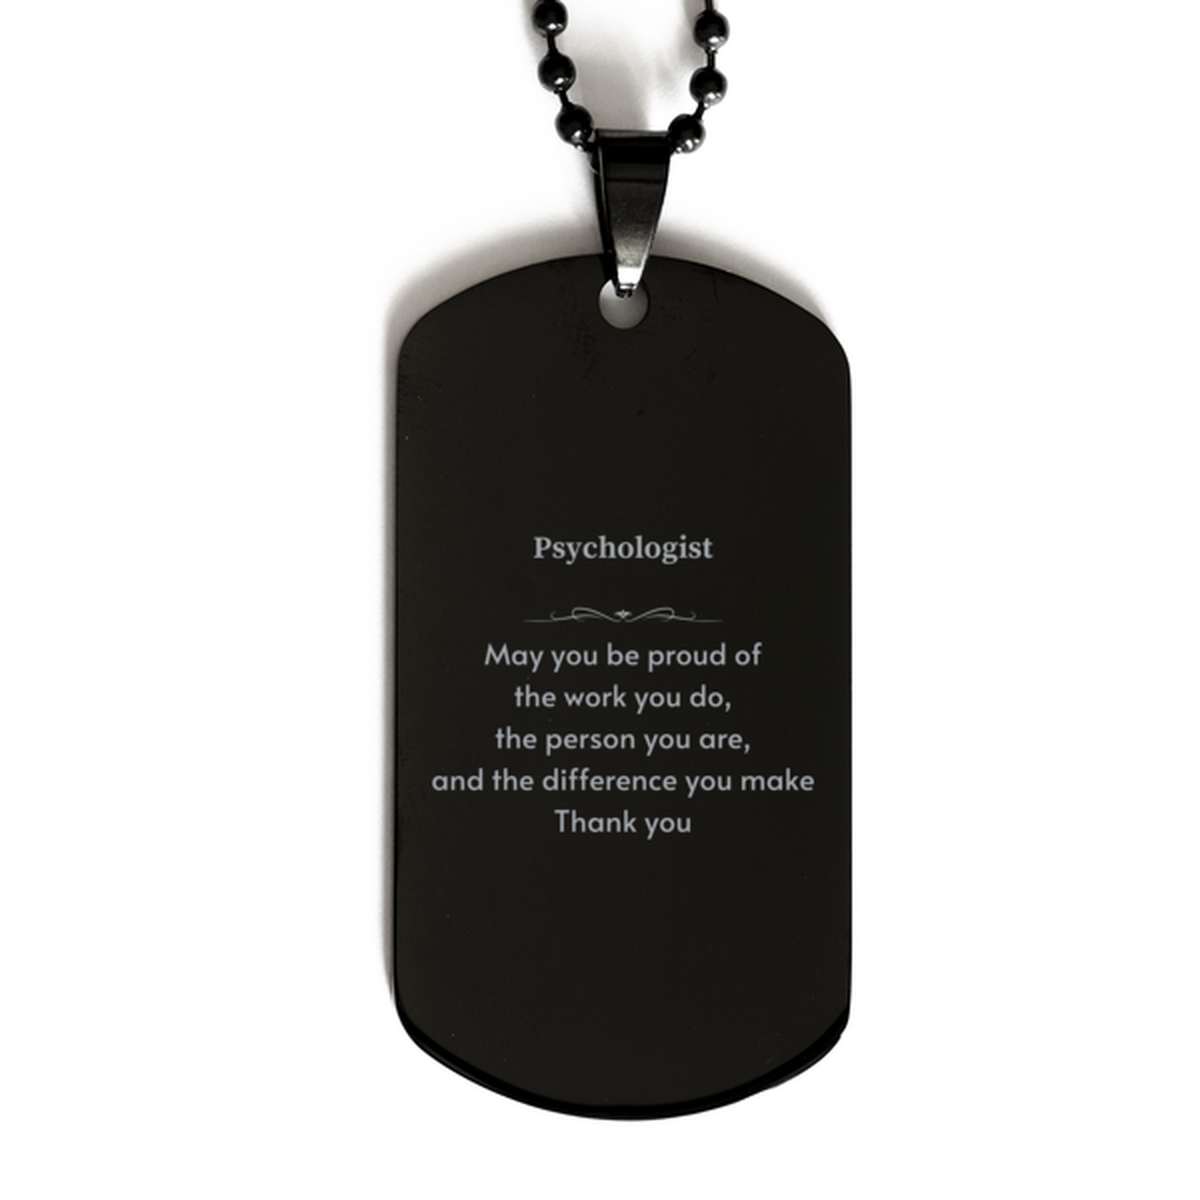 Heartwarming Black Dog Tag Retirement Coworkers Gifts for Psychologist, Psychologist May You be proud of the work you do, the person you are Gifts for Boss Men Women Friends